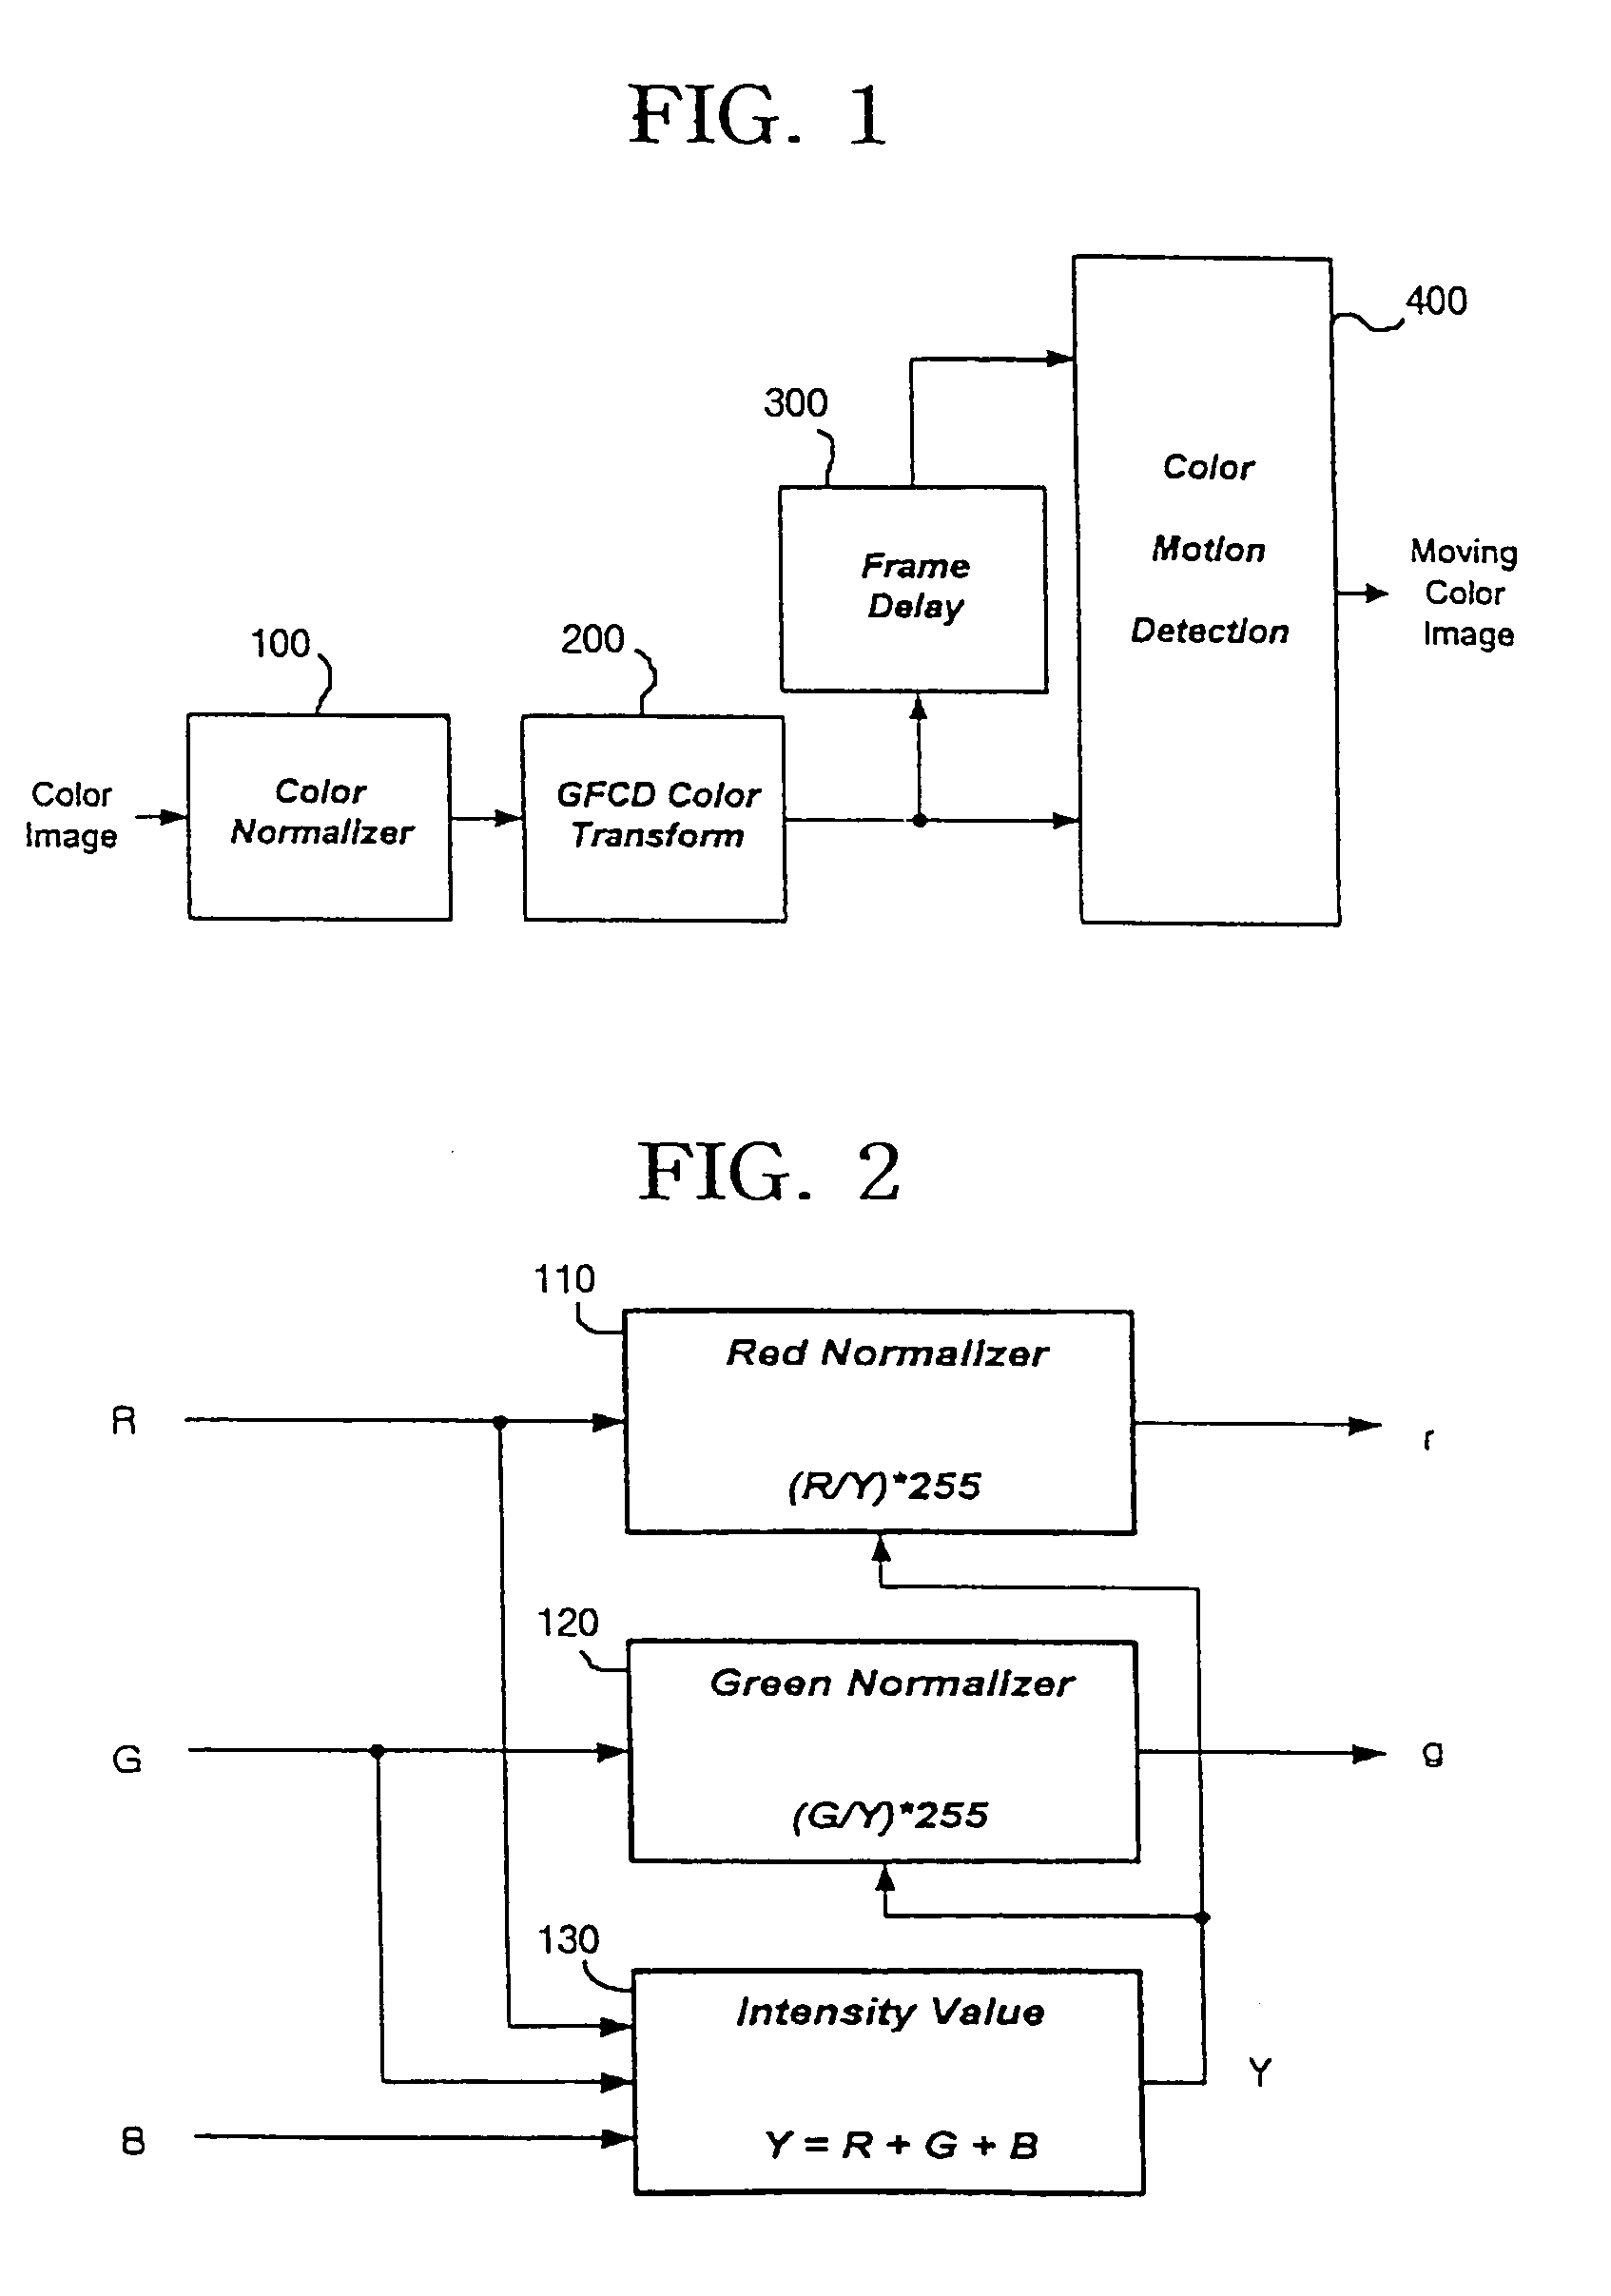 Apparatus and method for detecting a moving object in a sequence of color frame images